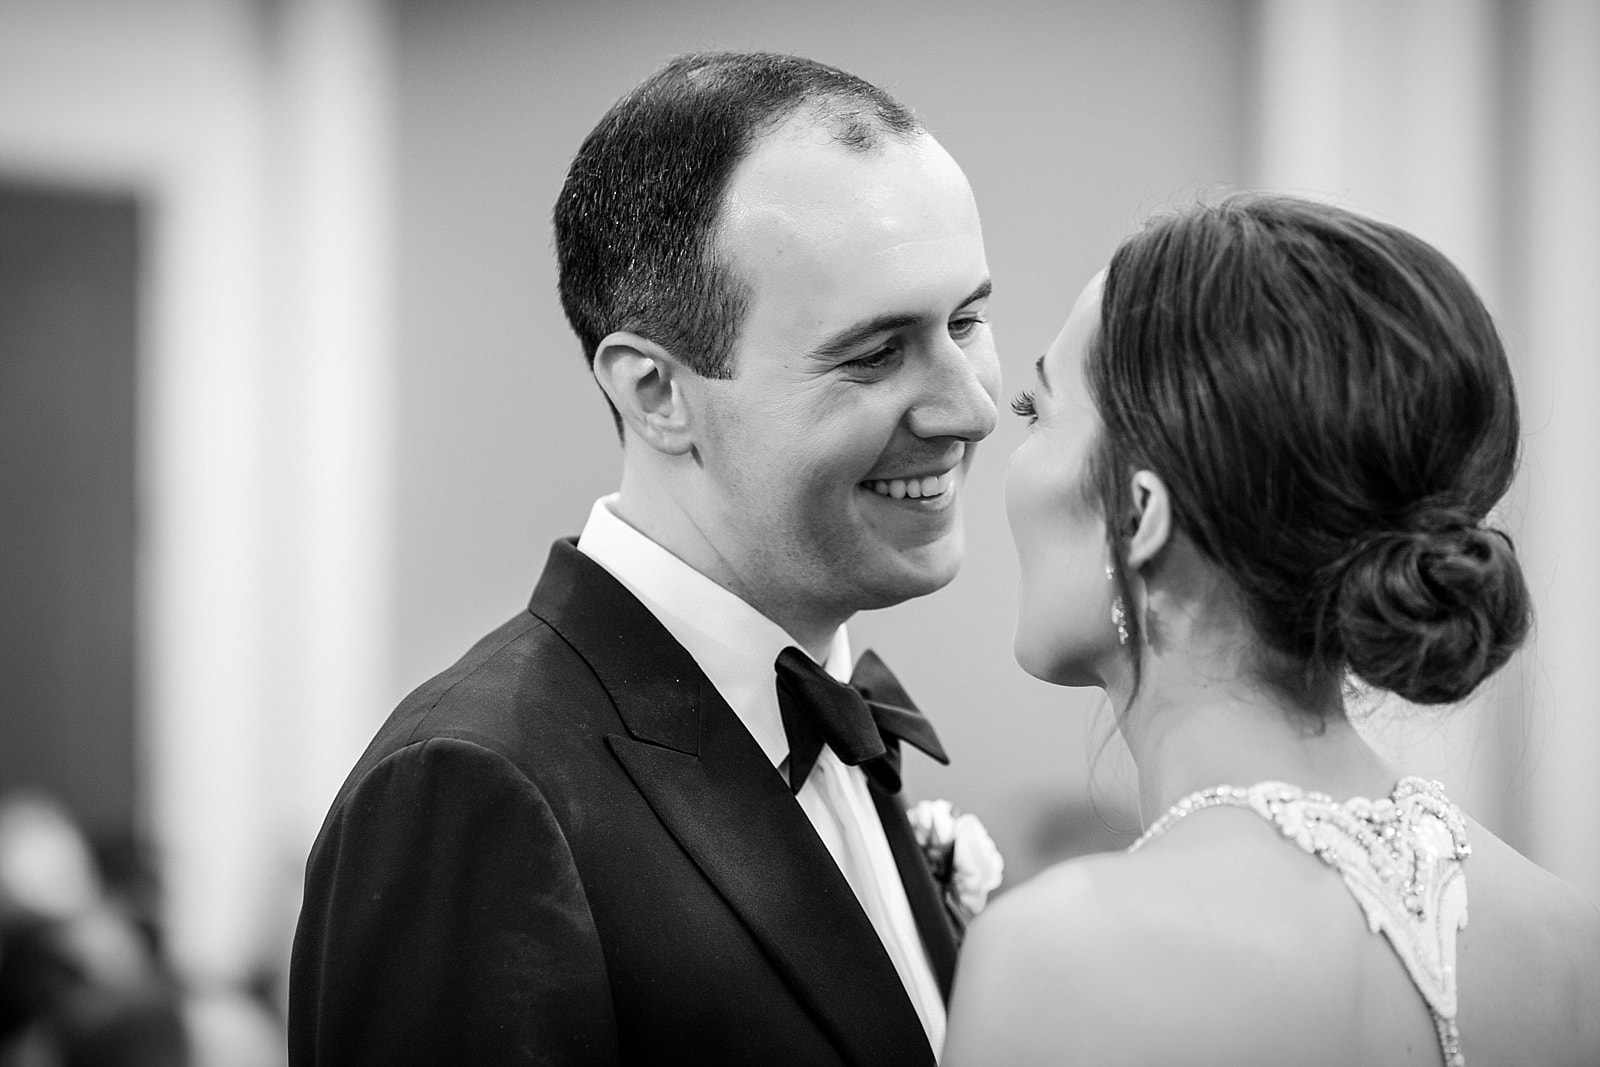 husband and wife, wedding portrait, first dance, bride and groom first dance, black and white 